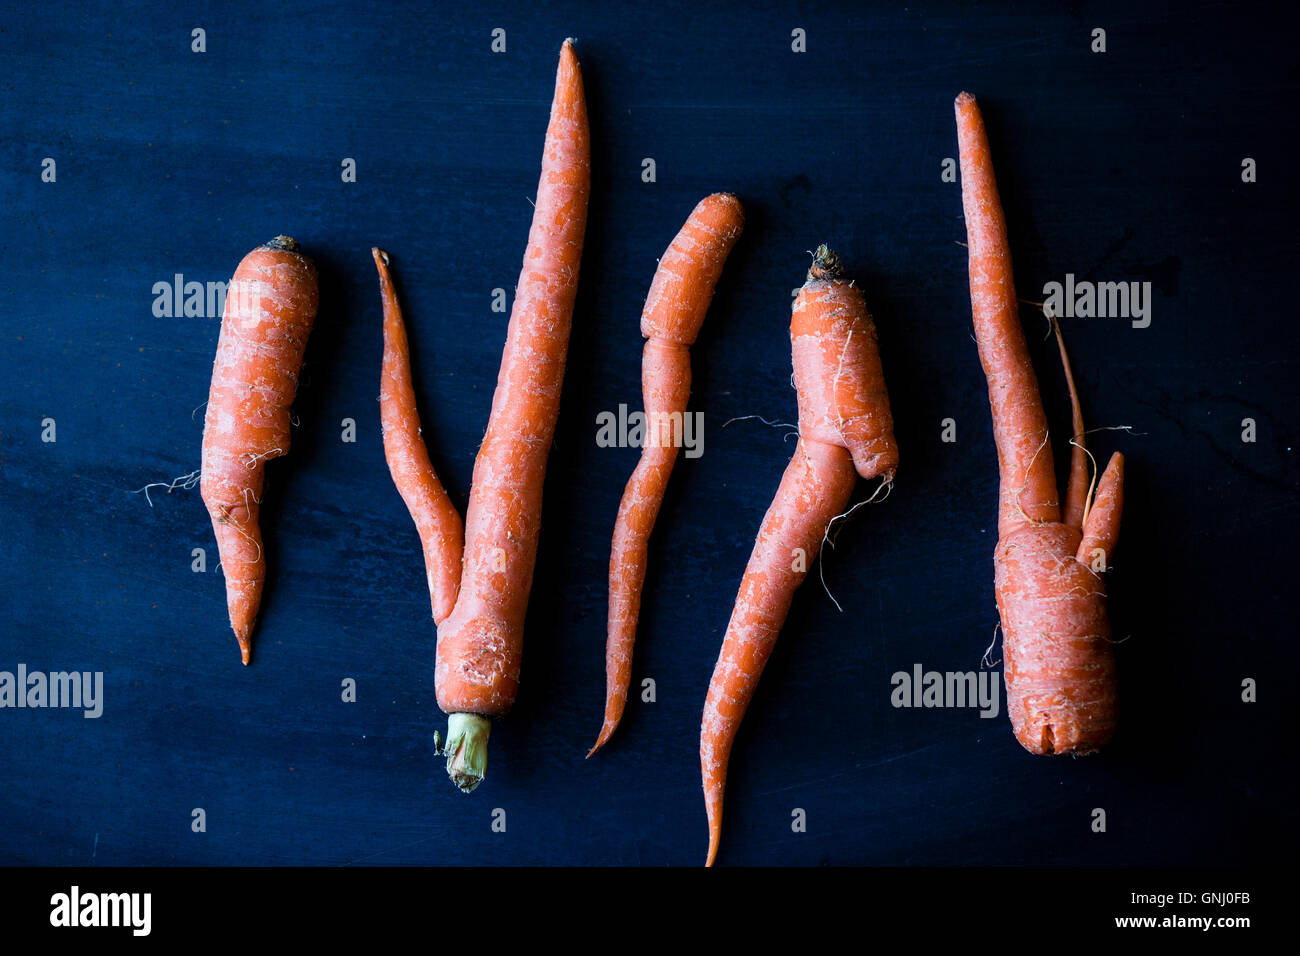 Imperfect carrots on a blue bakground. Stock Photo